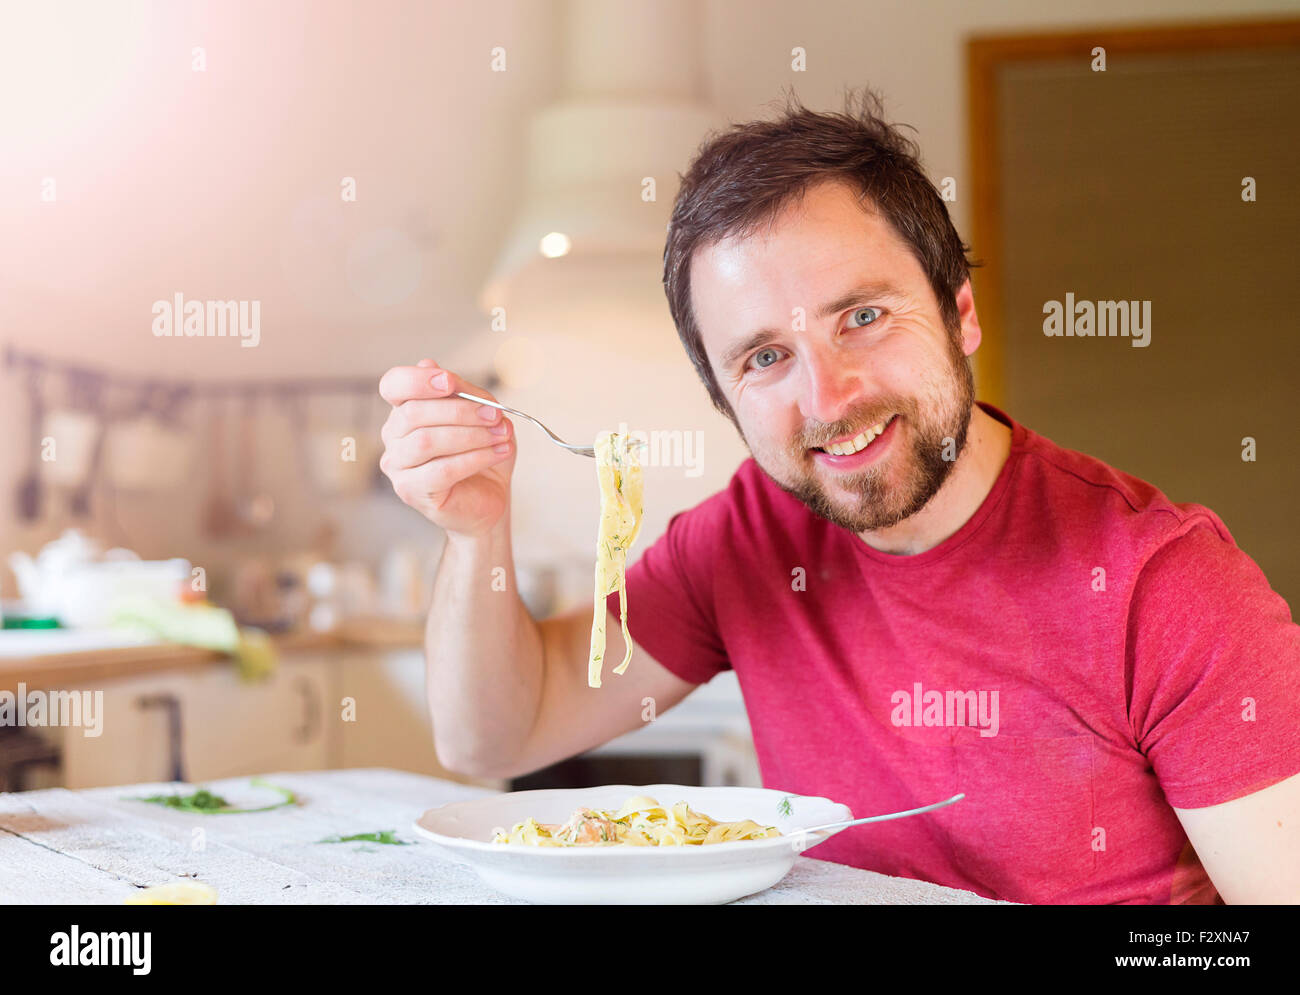 Young handsome man in the kitchen eating salmon tagliatelle Stock Photo